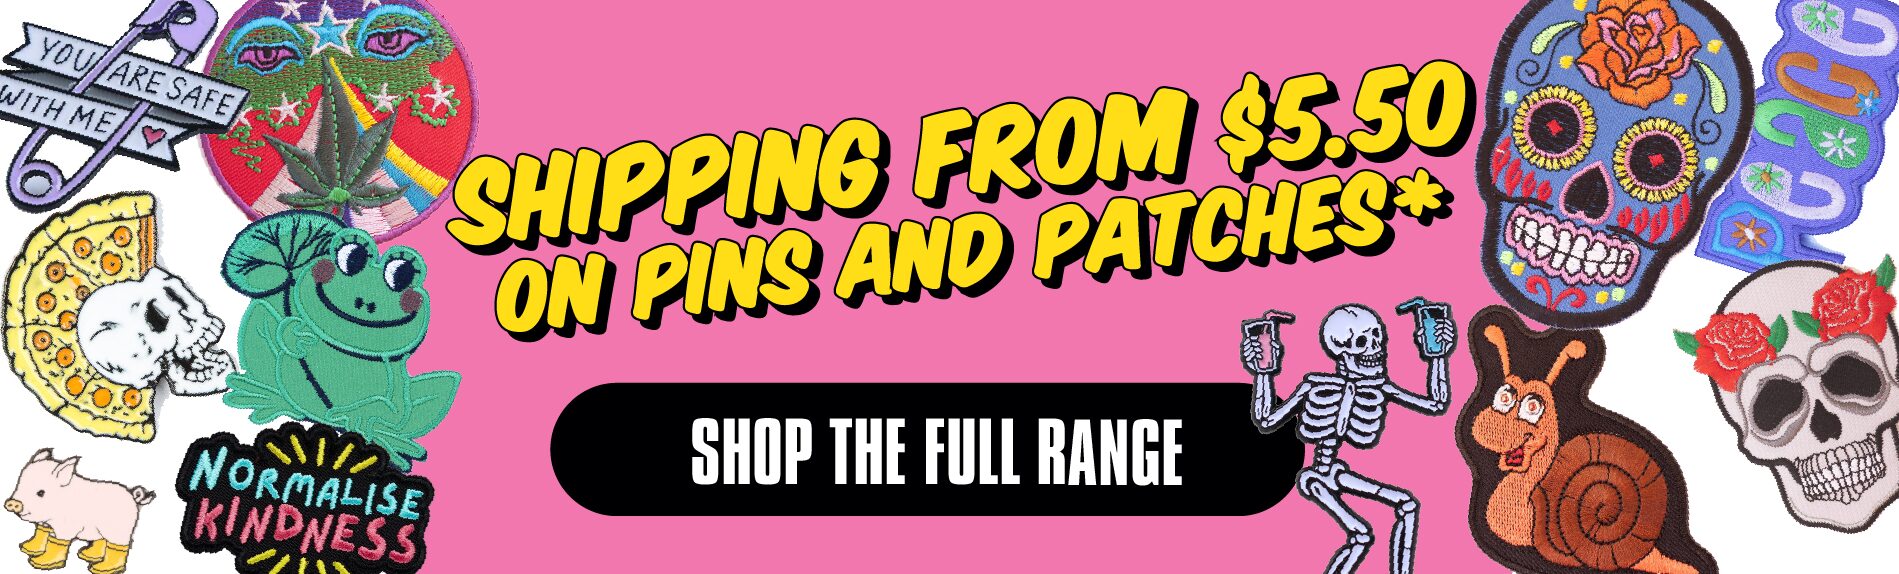 Shipping Banner For Pins and Patches